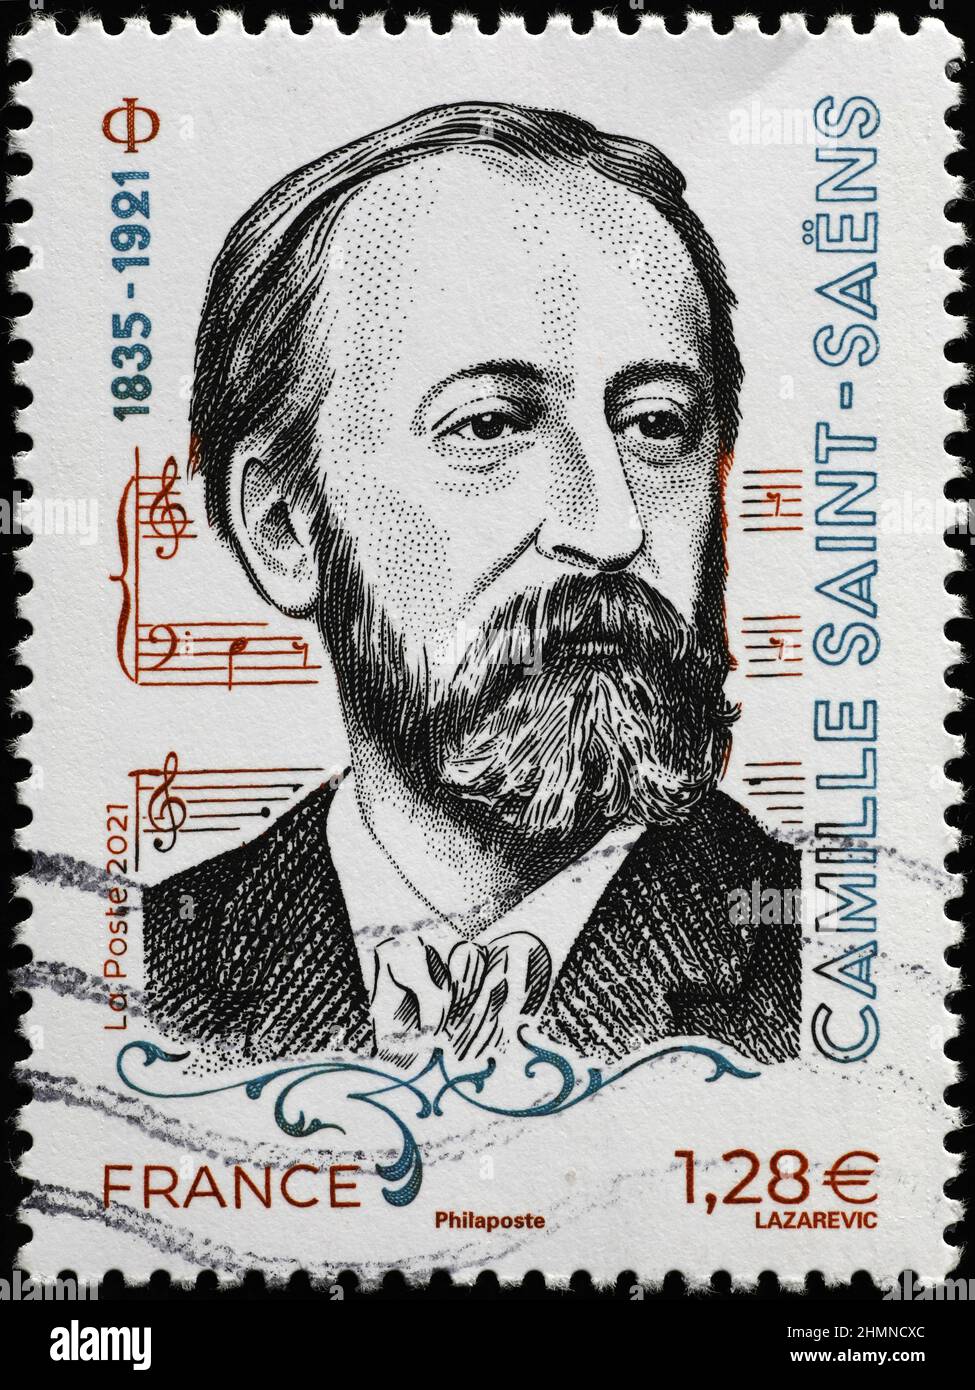 Camille saint saens hi-res stock photography and images - Alamy